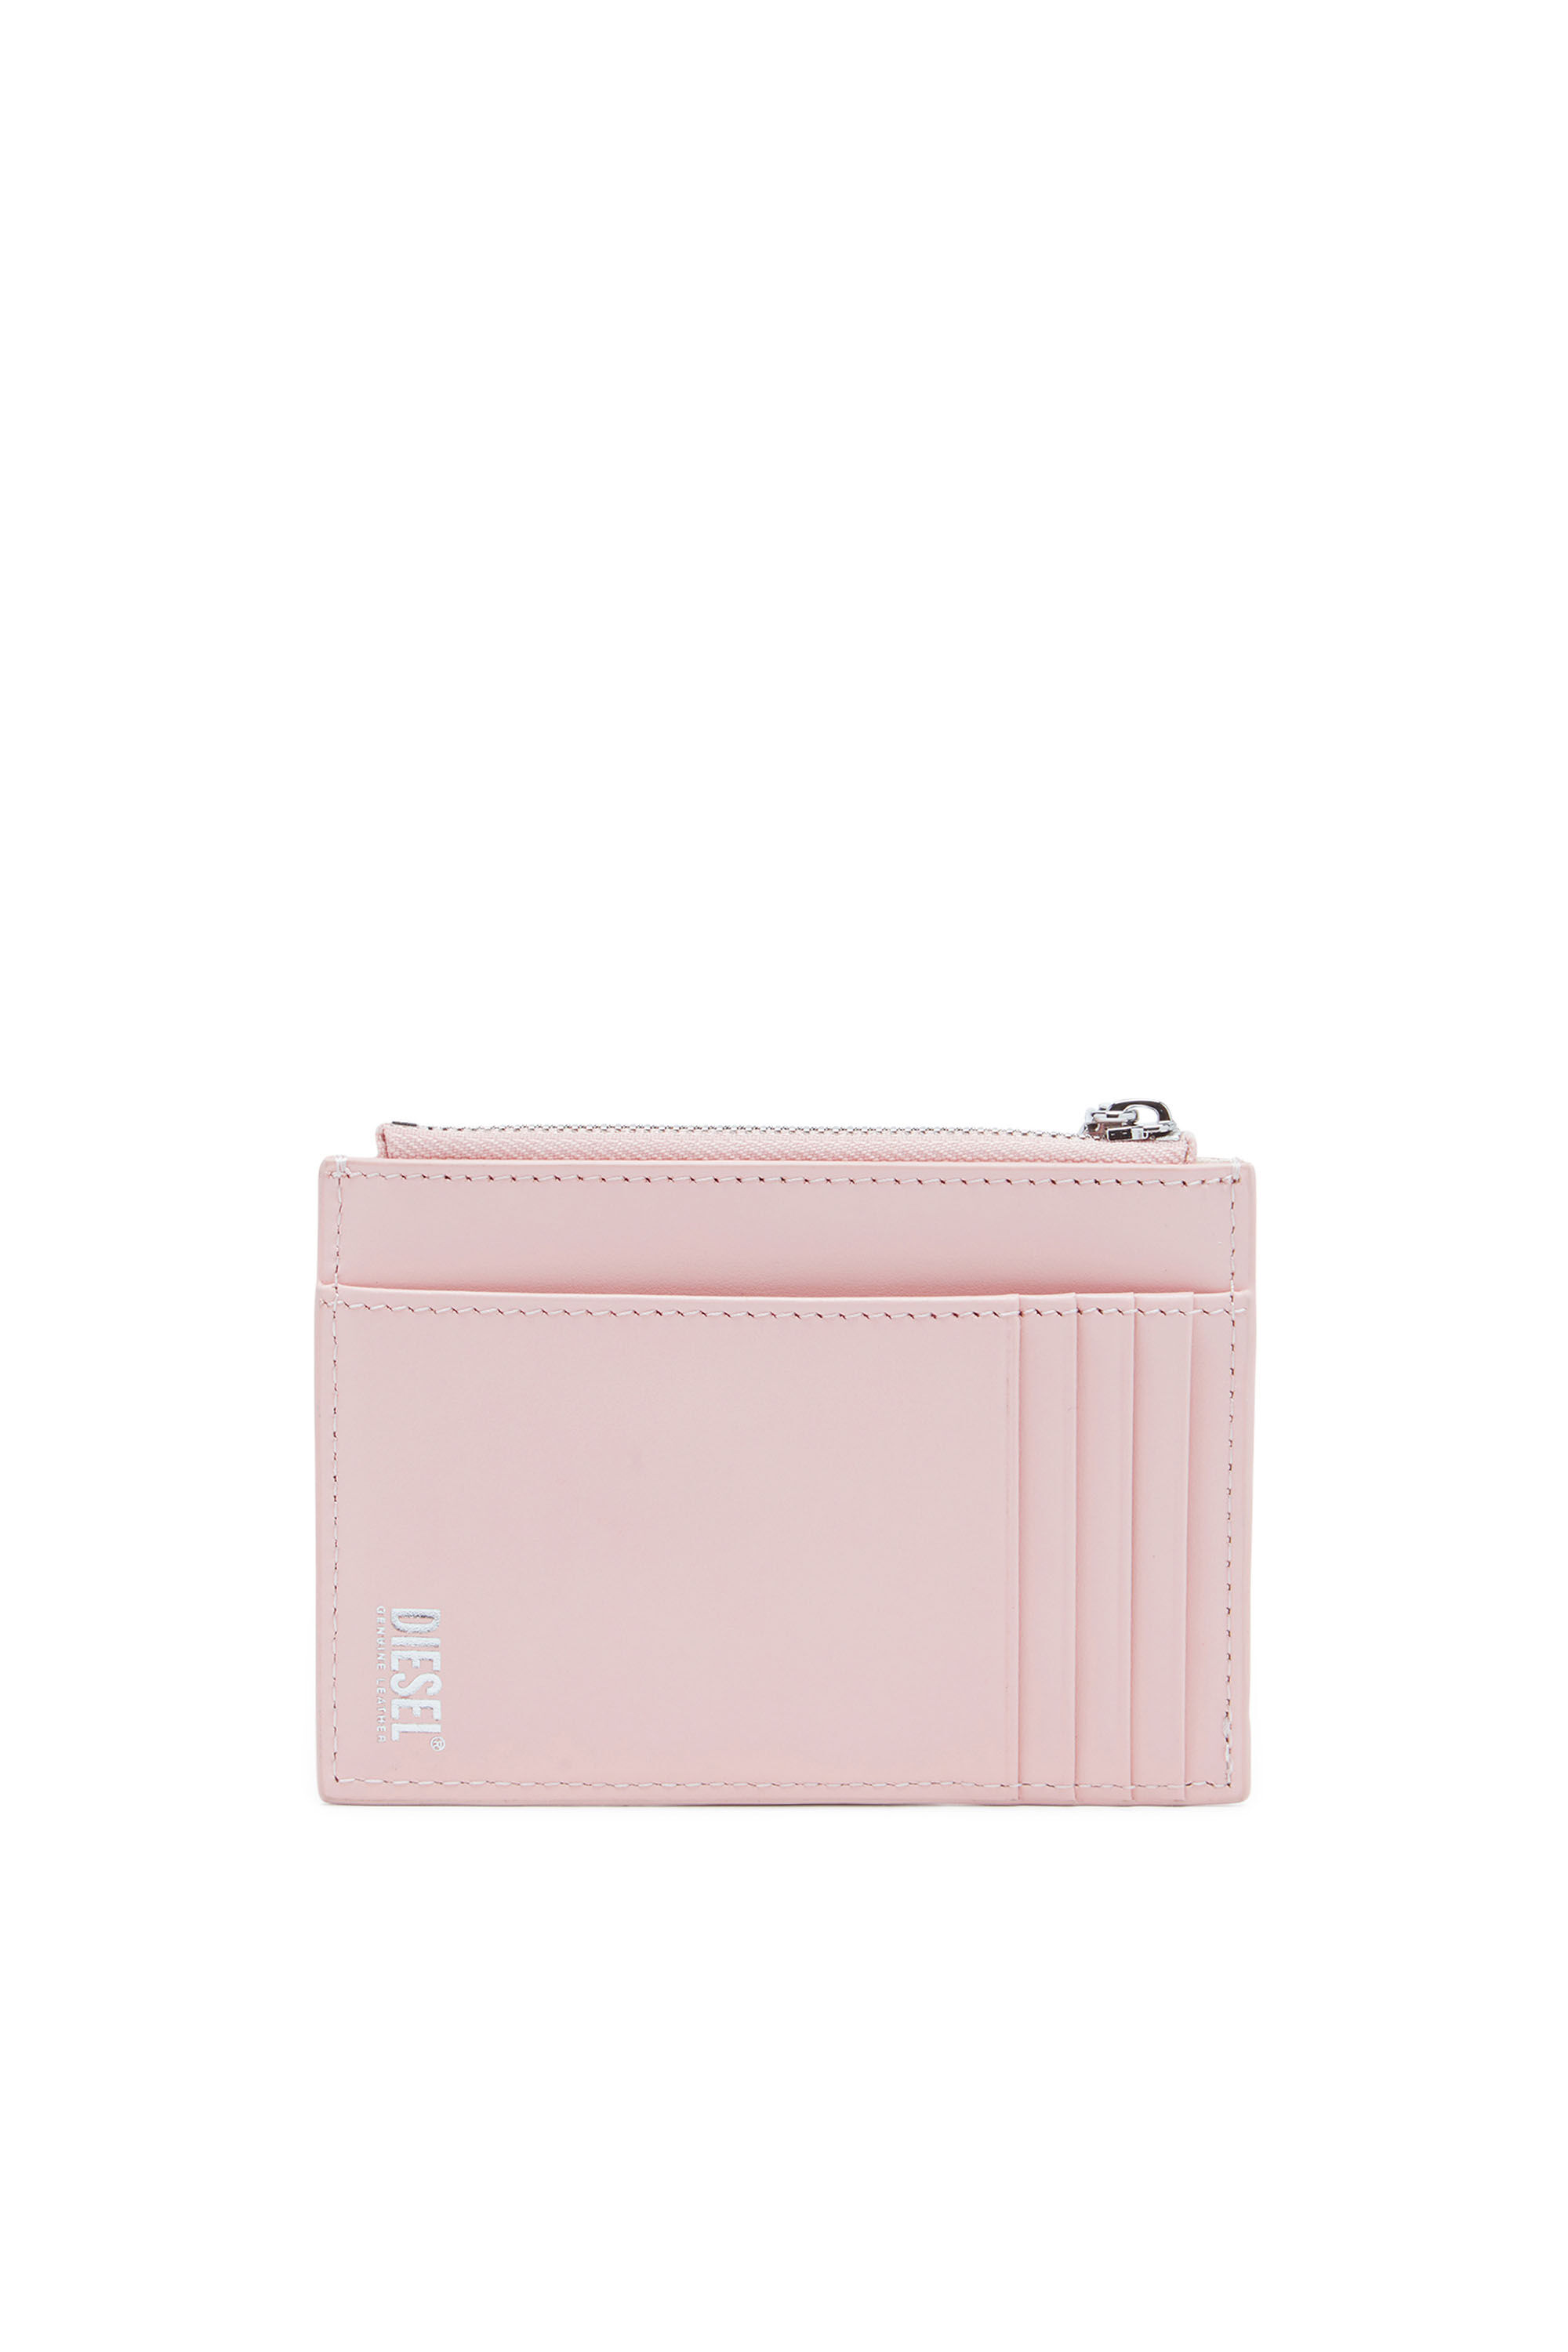 Diesel - 1DR CARD HOLDER I, Woman Card holder in pastel leather in Pink - Image 2